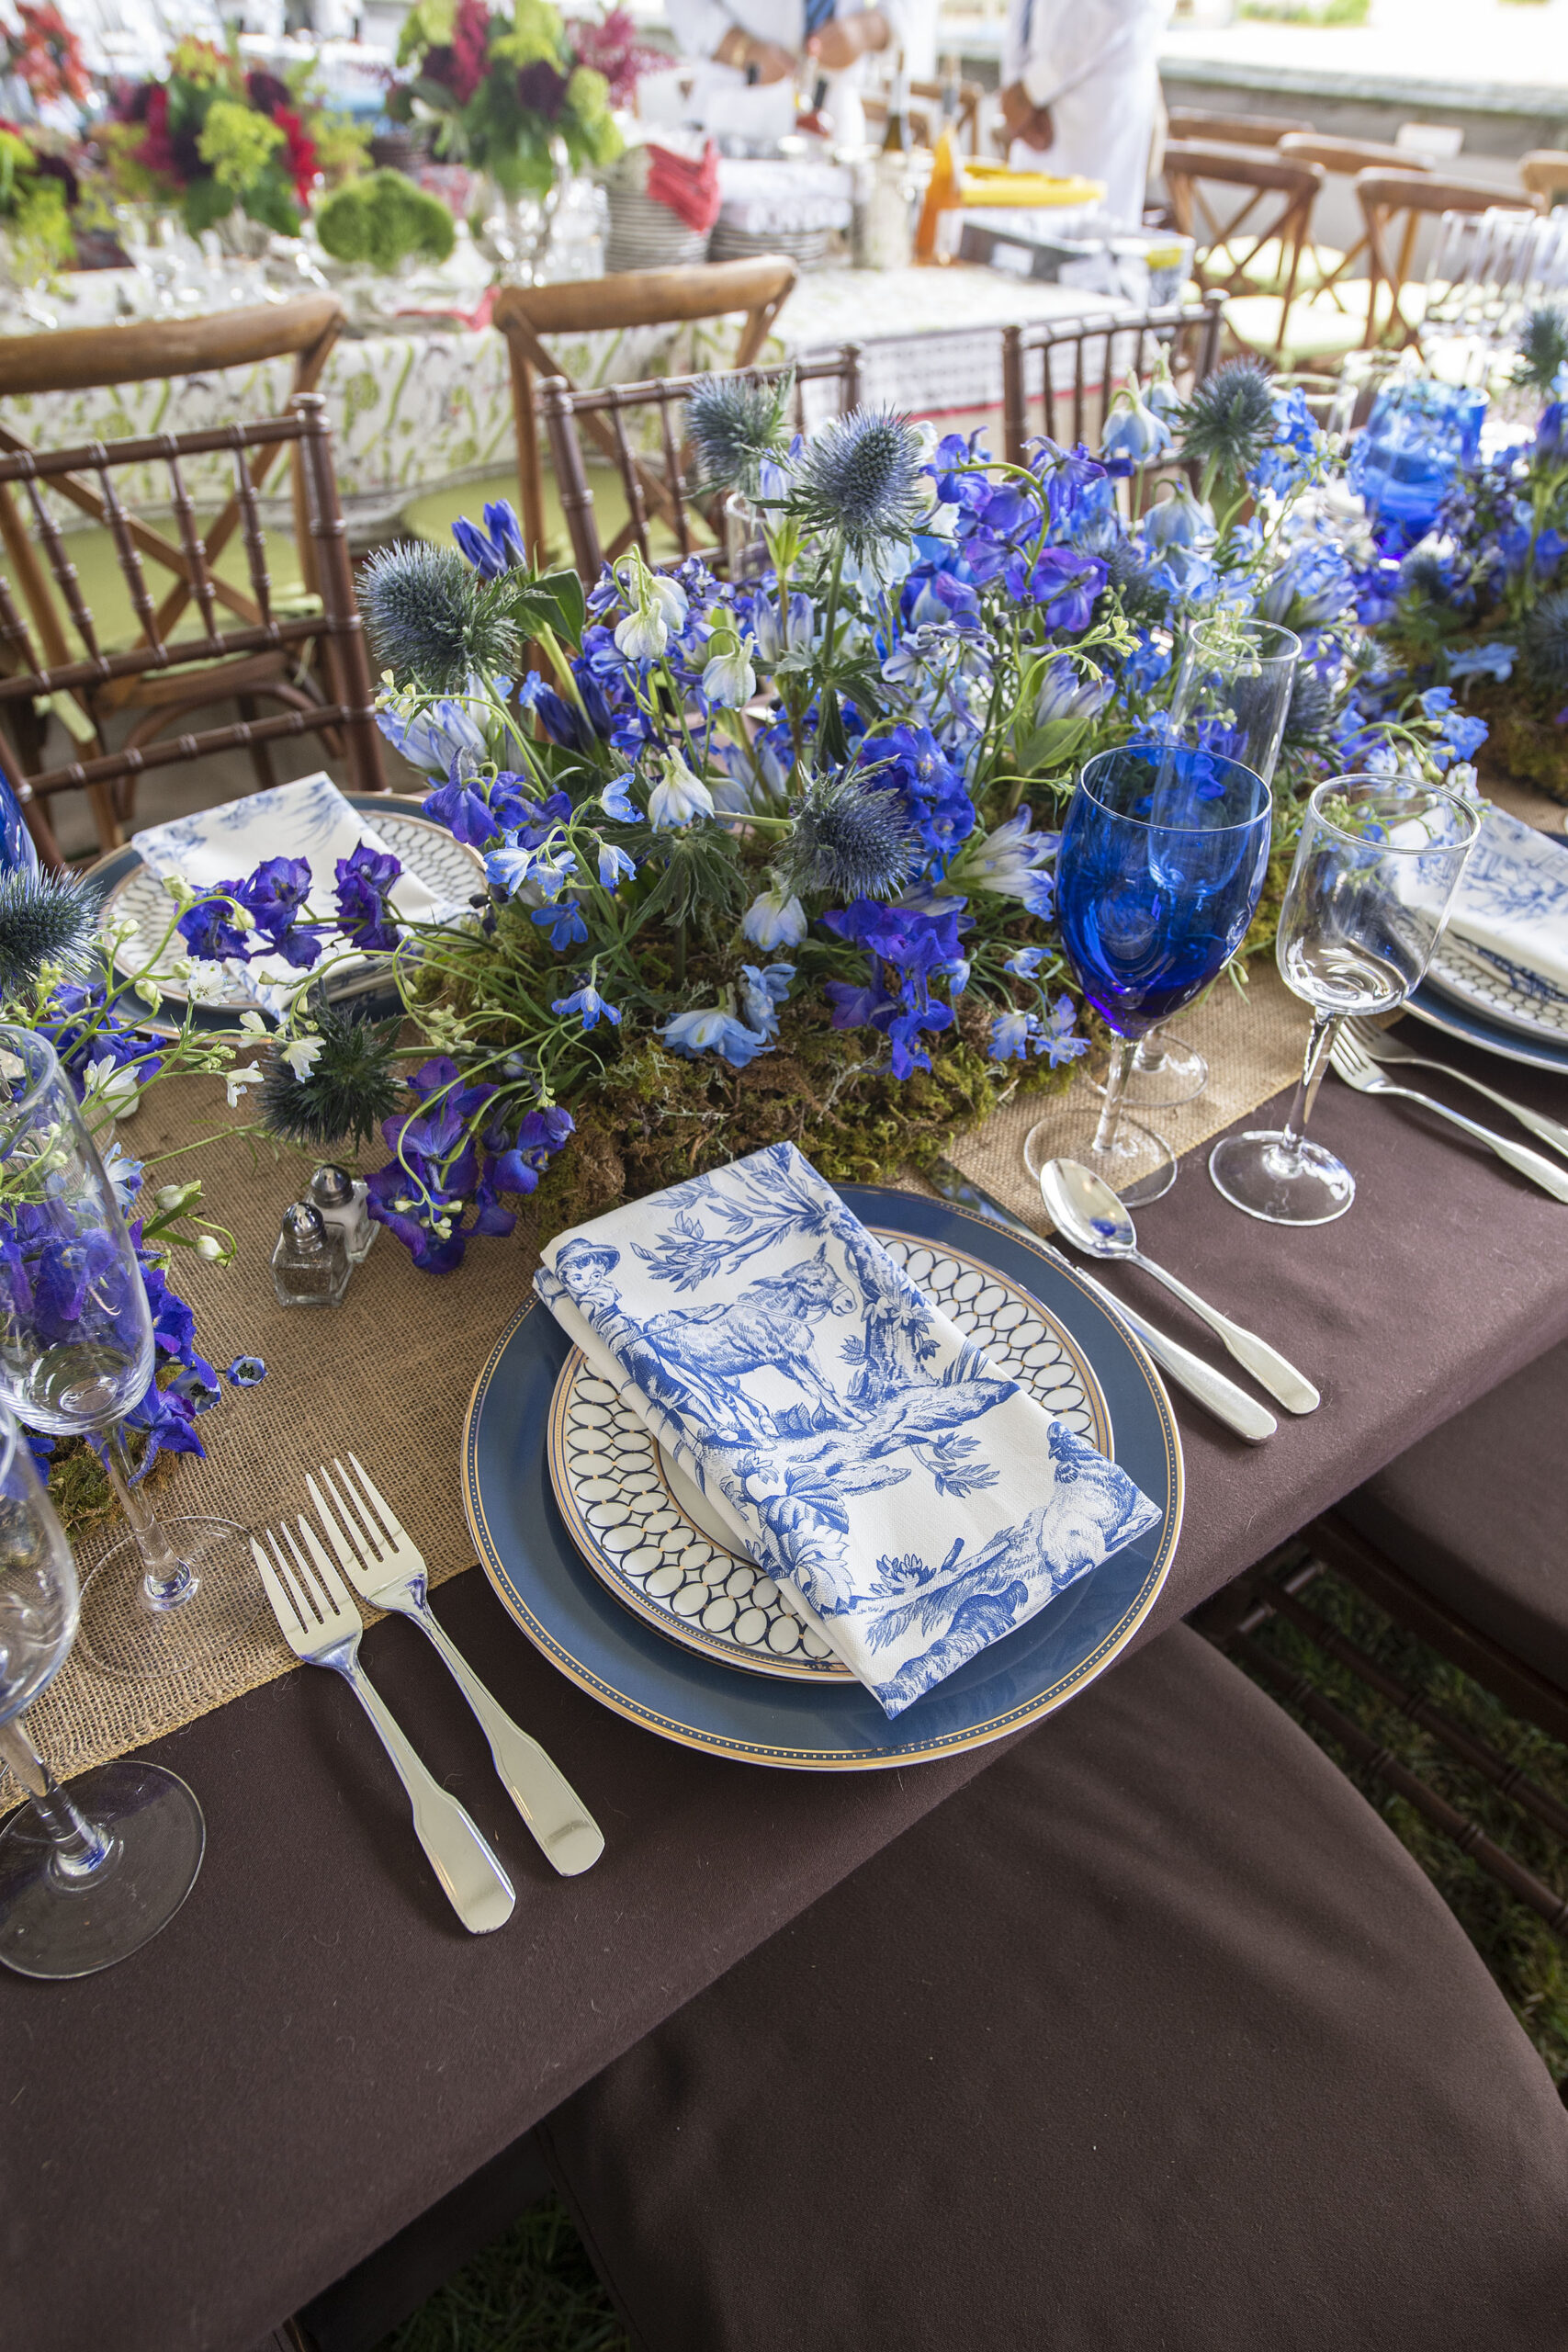 The table setting for the Meralax Farm table in the VIP tent at the 2021 Hampton Classic on Grand Prix Sunday, September 5th, 2021